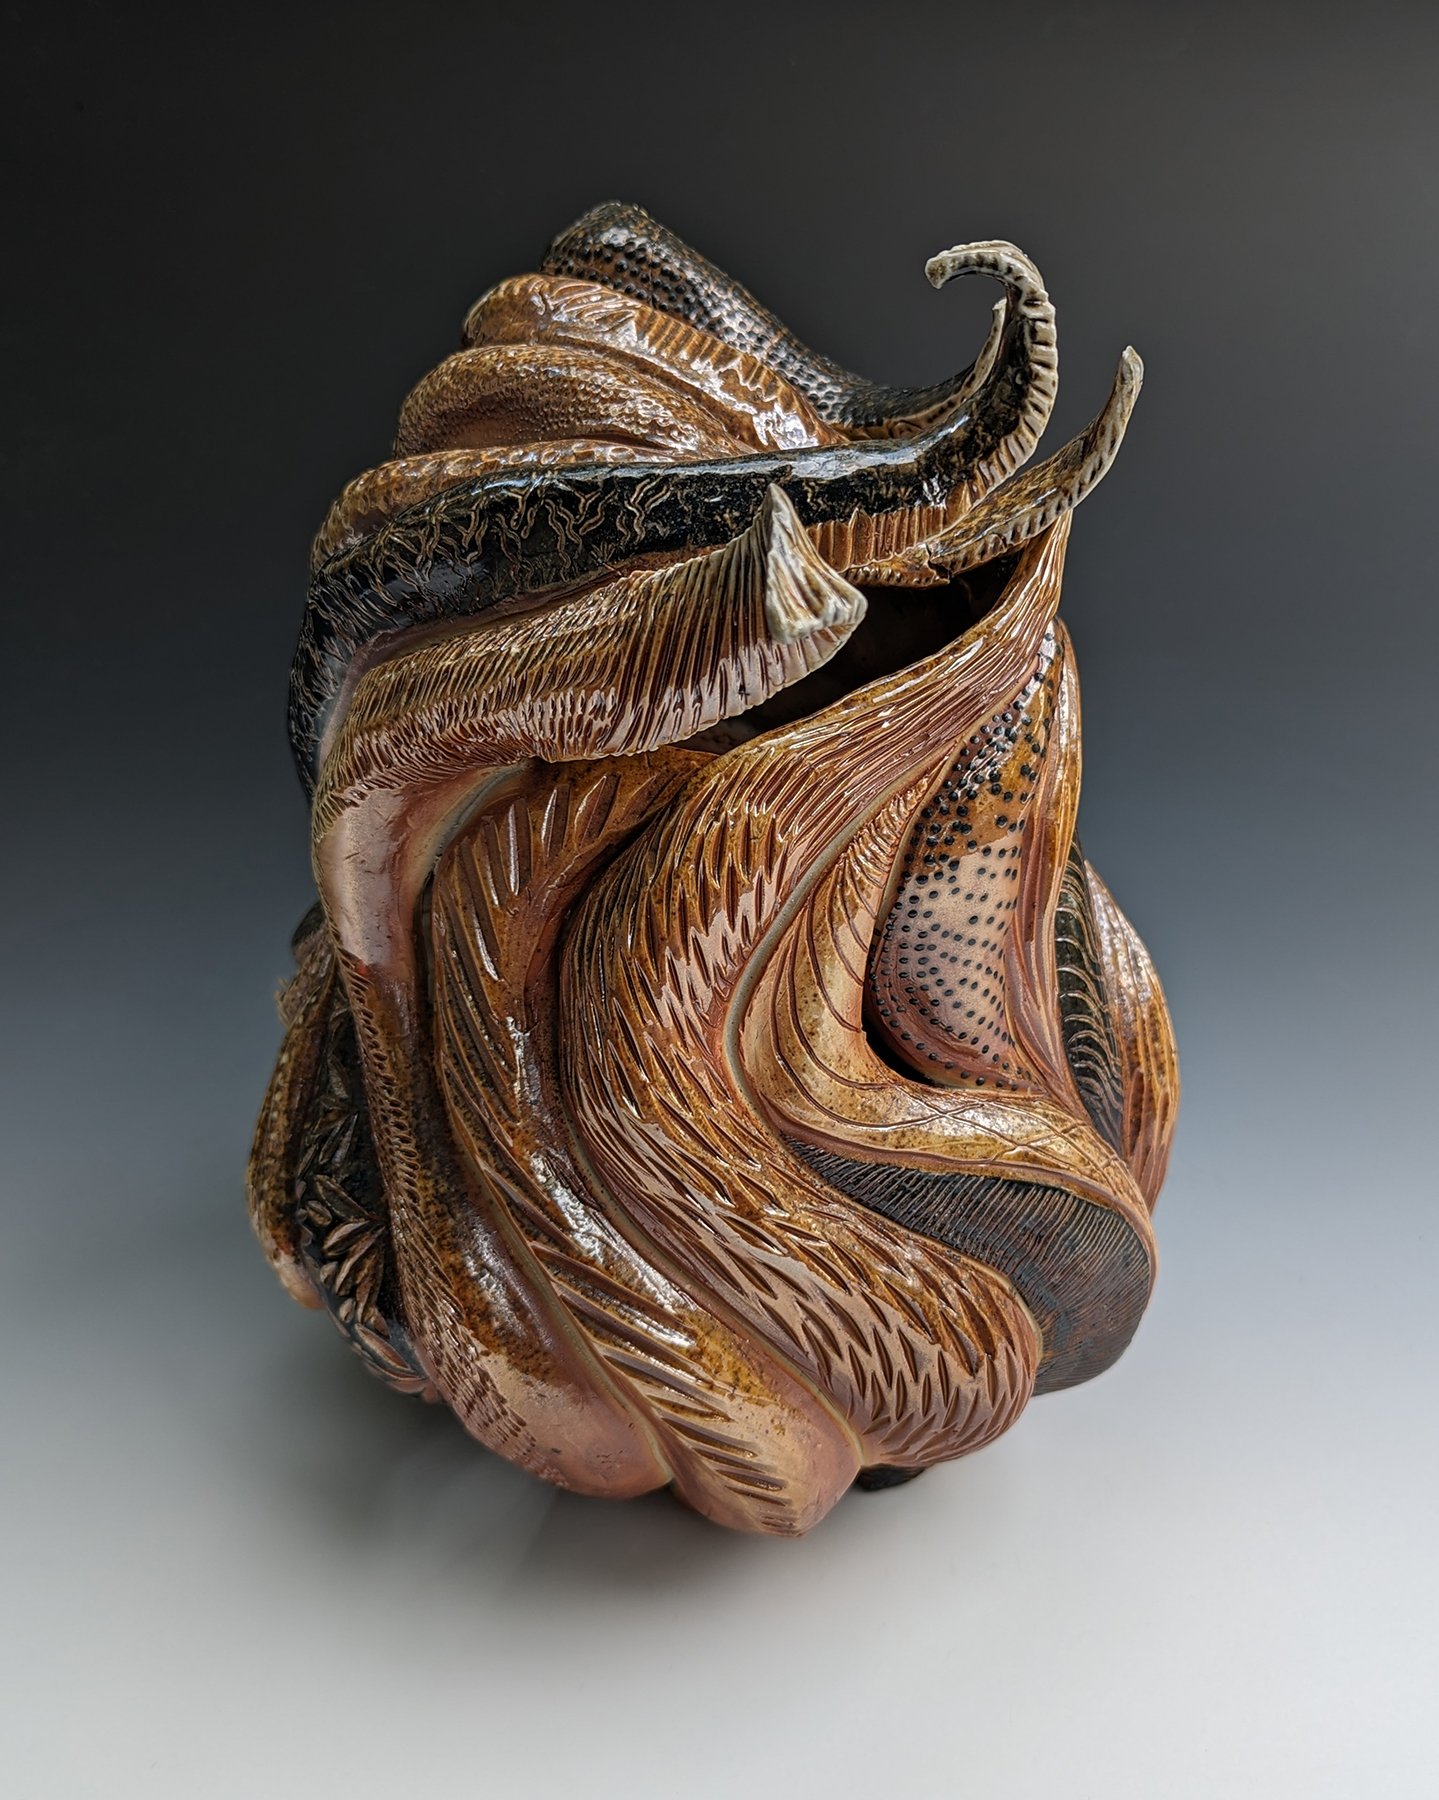    Textured Wave Sculpture,   wood-fired ceramics, 12 x 8 x 9 inches 